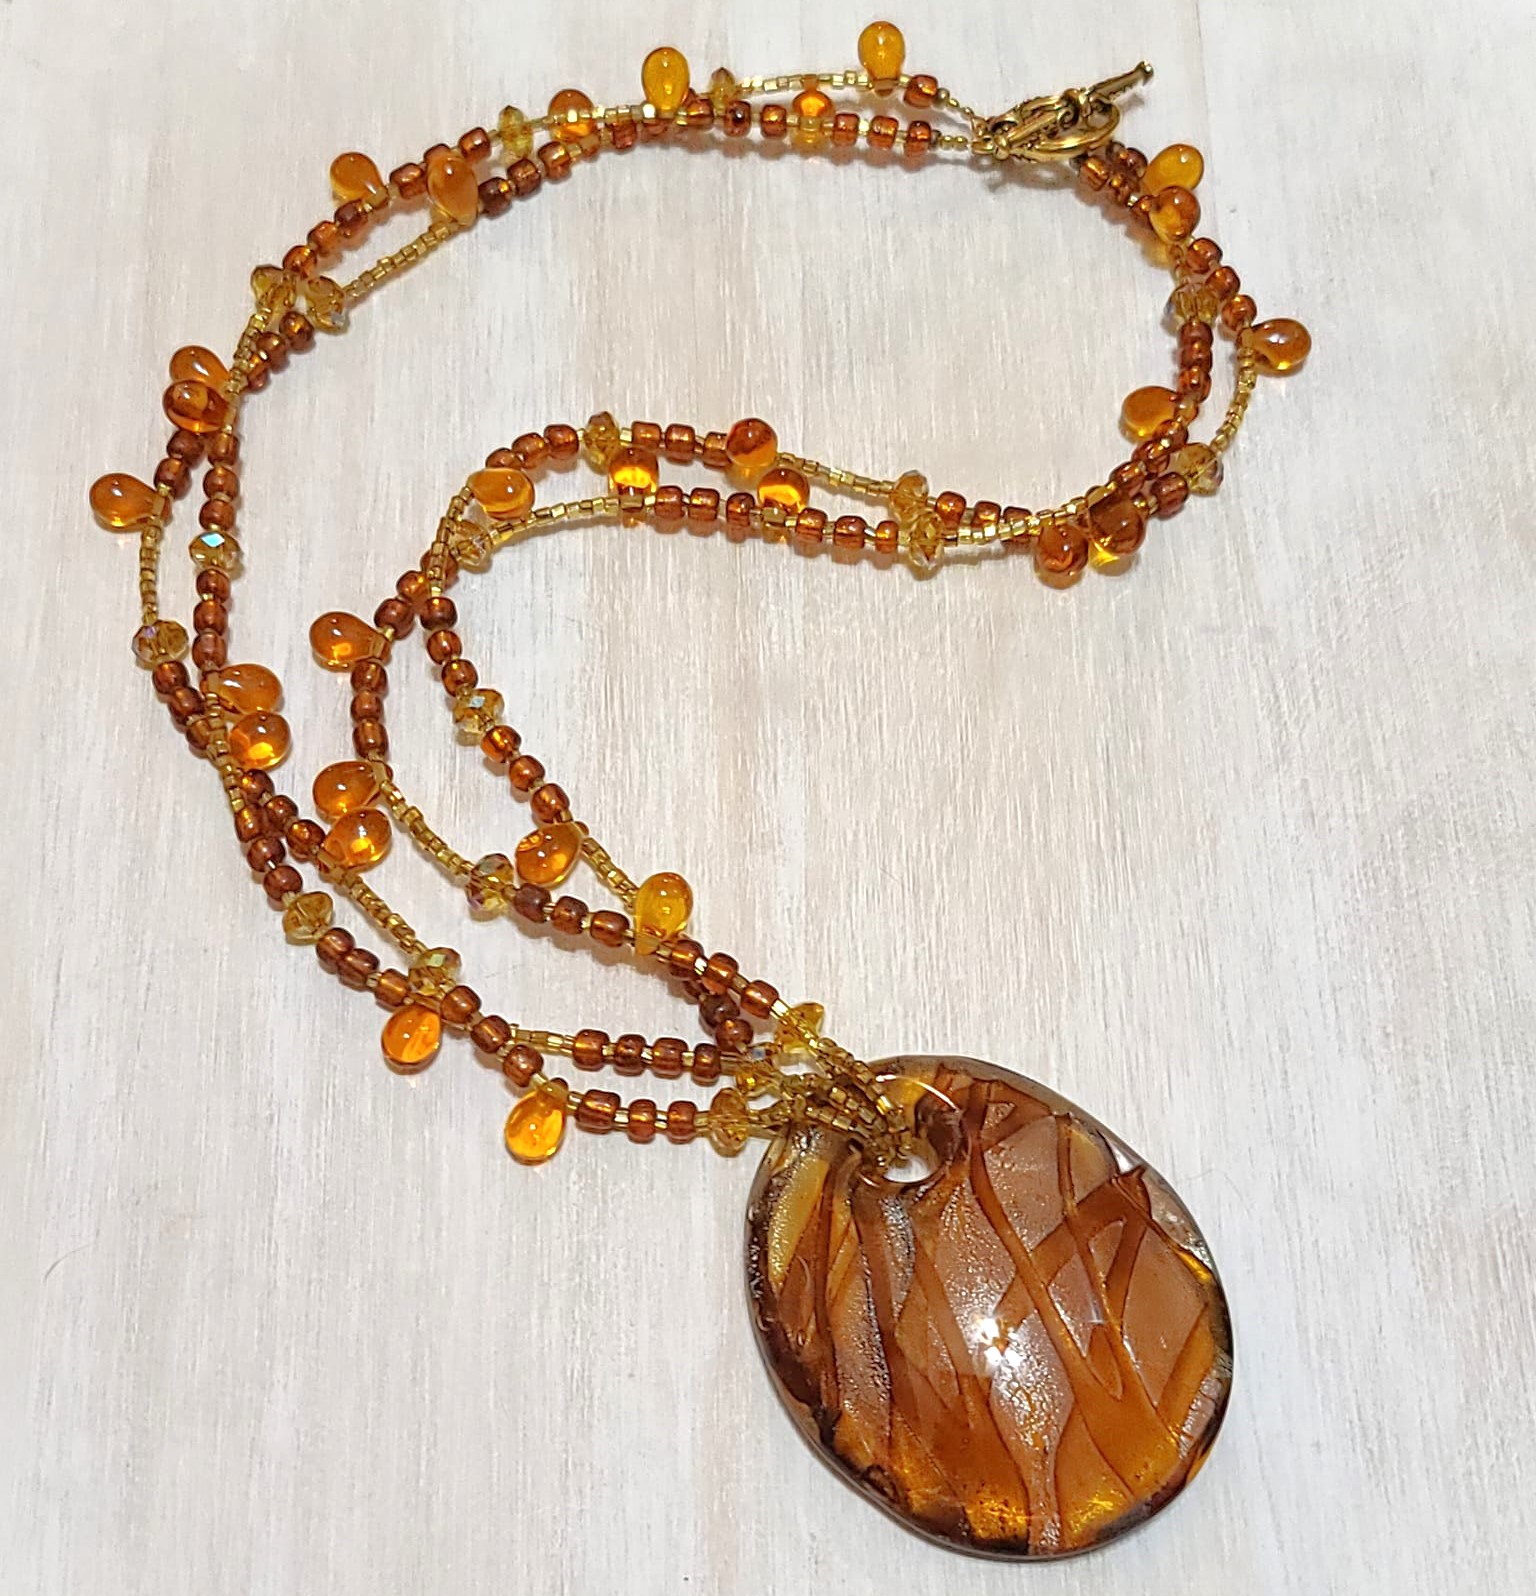 Lampwork glass necklace, handcrafted, dangle pendant, 2 strand